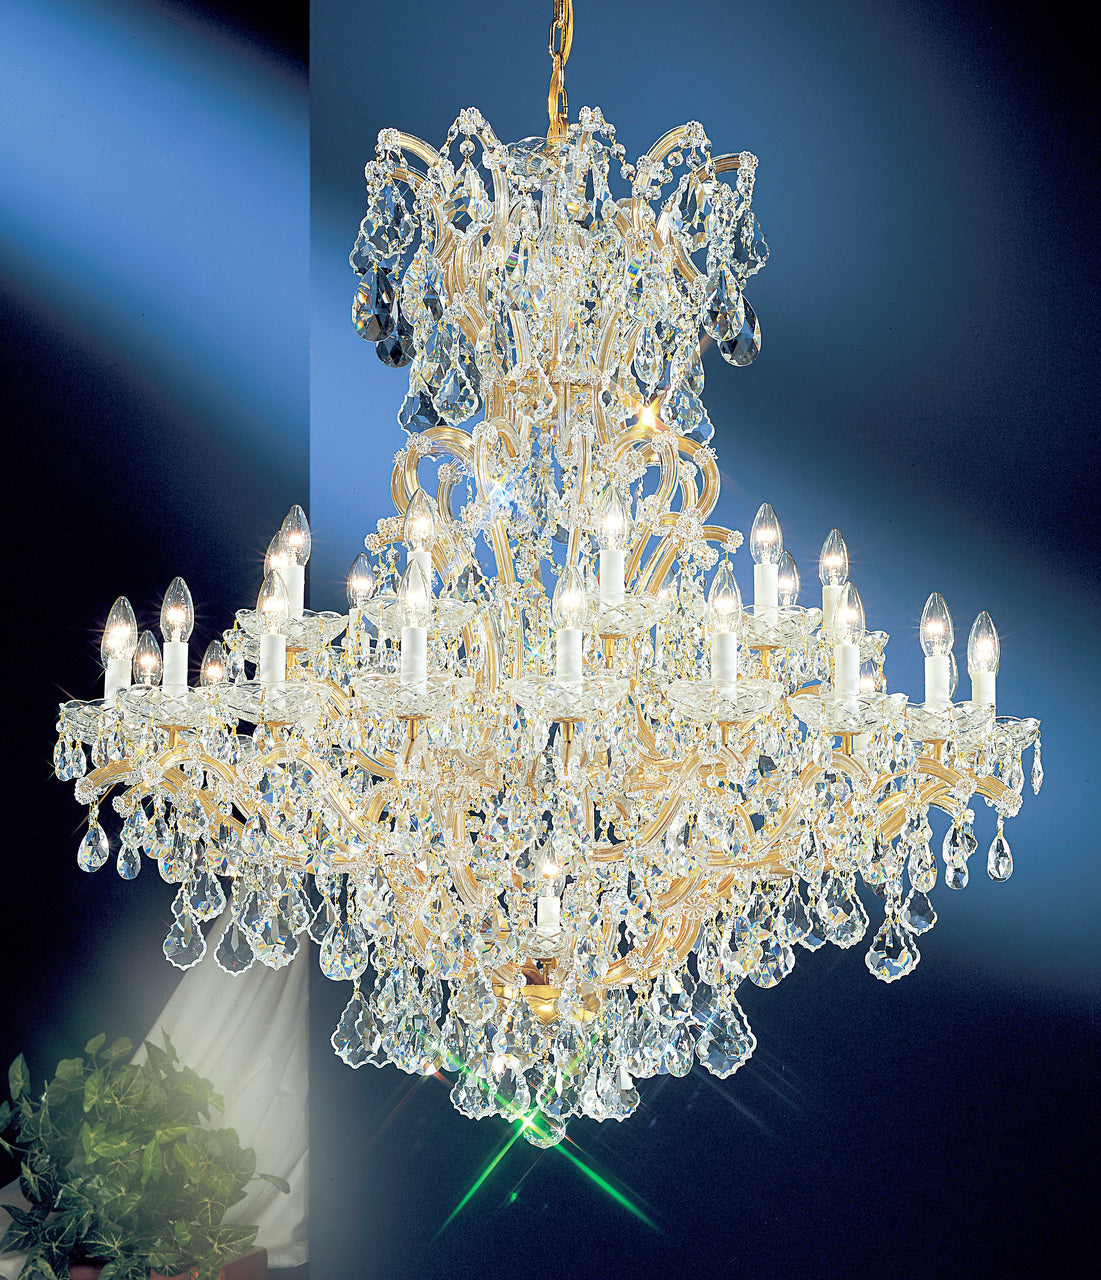 Classic Lighting 8163 OWG S Maria Theresa Traditional Crystal Chandelier in Olde World Gold (Imported from Italy)